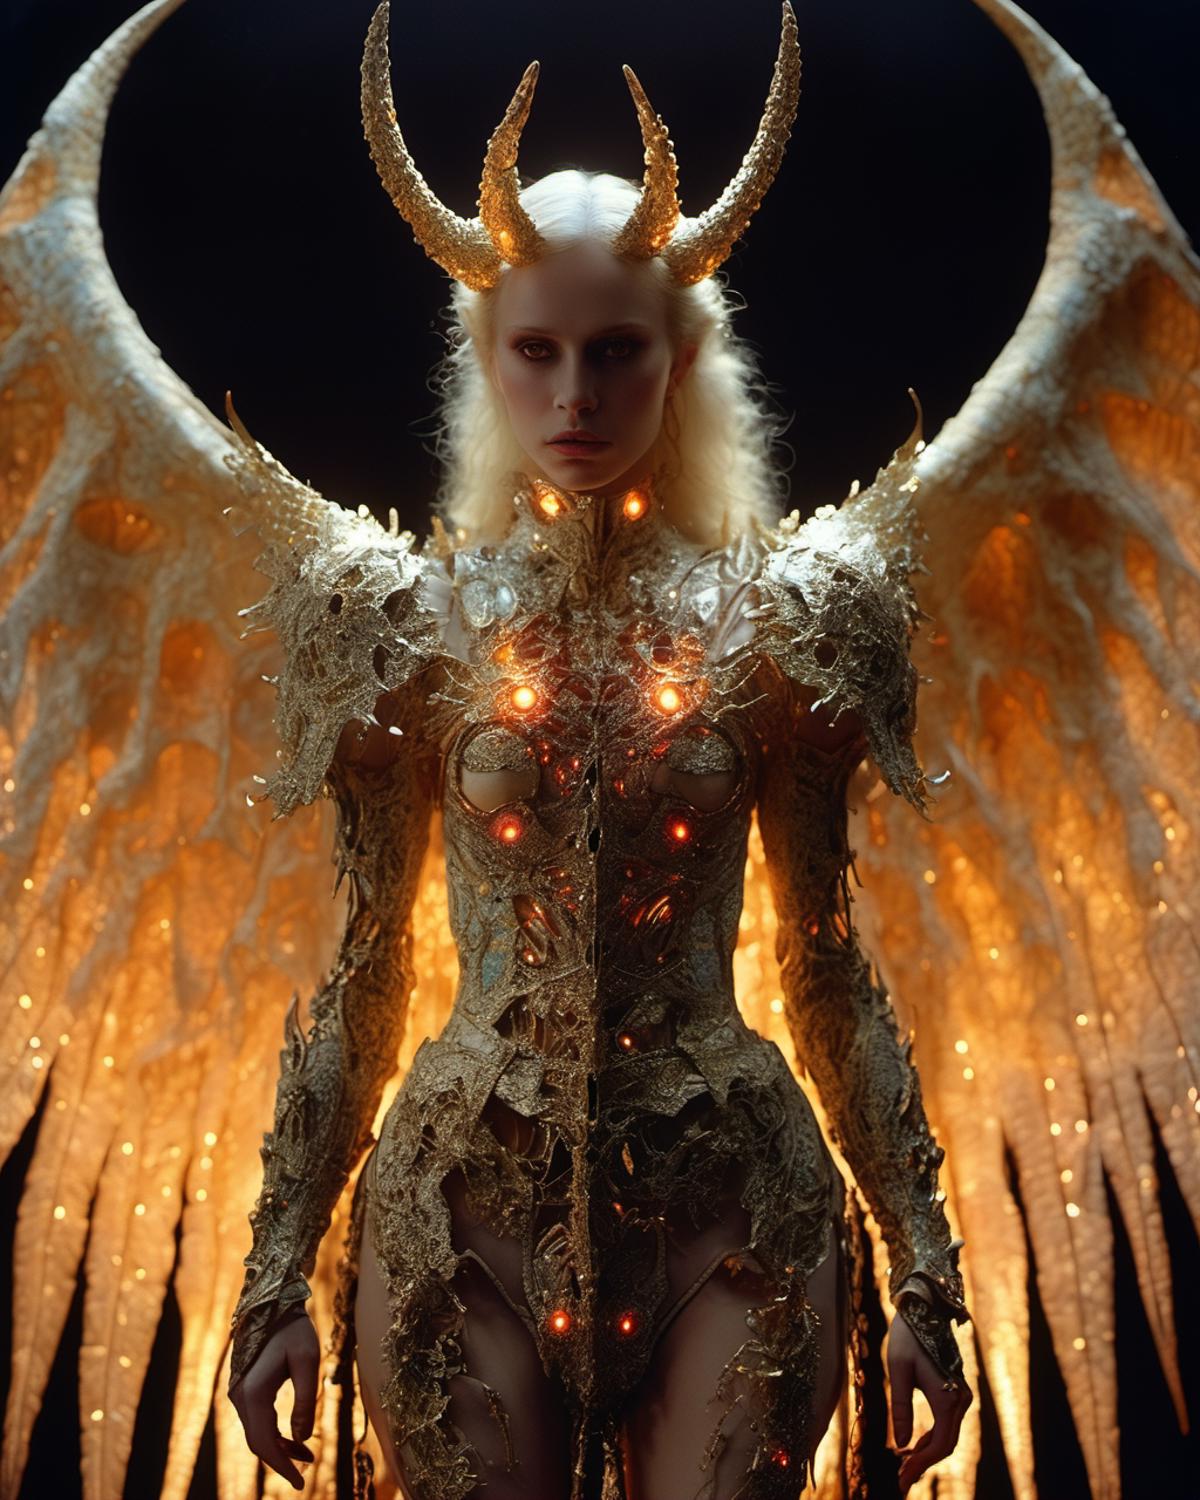 An Angelic Figure Wearing Gold and Glowing Light, with Wings and a Crown.